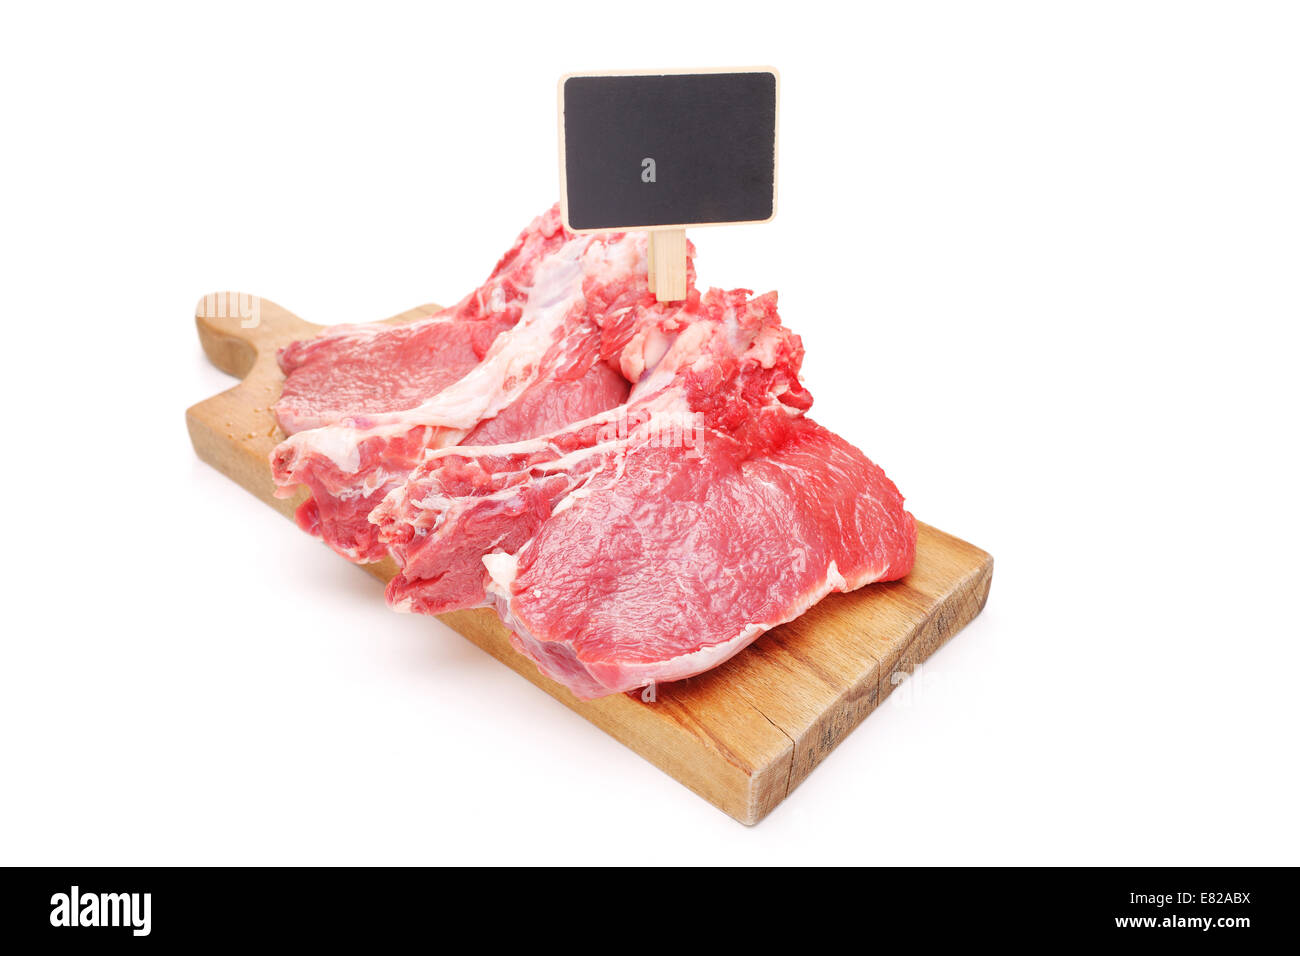 Studio shot of raw beefsteaks on a cutting board with a price tag isolated on white background Stock Photo